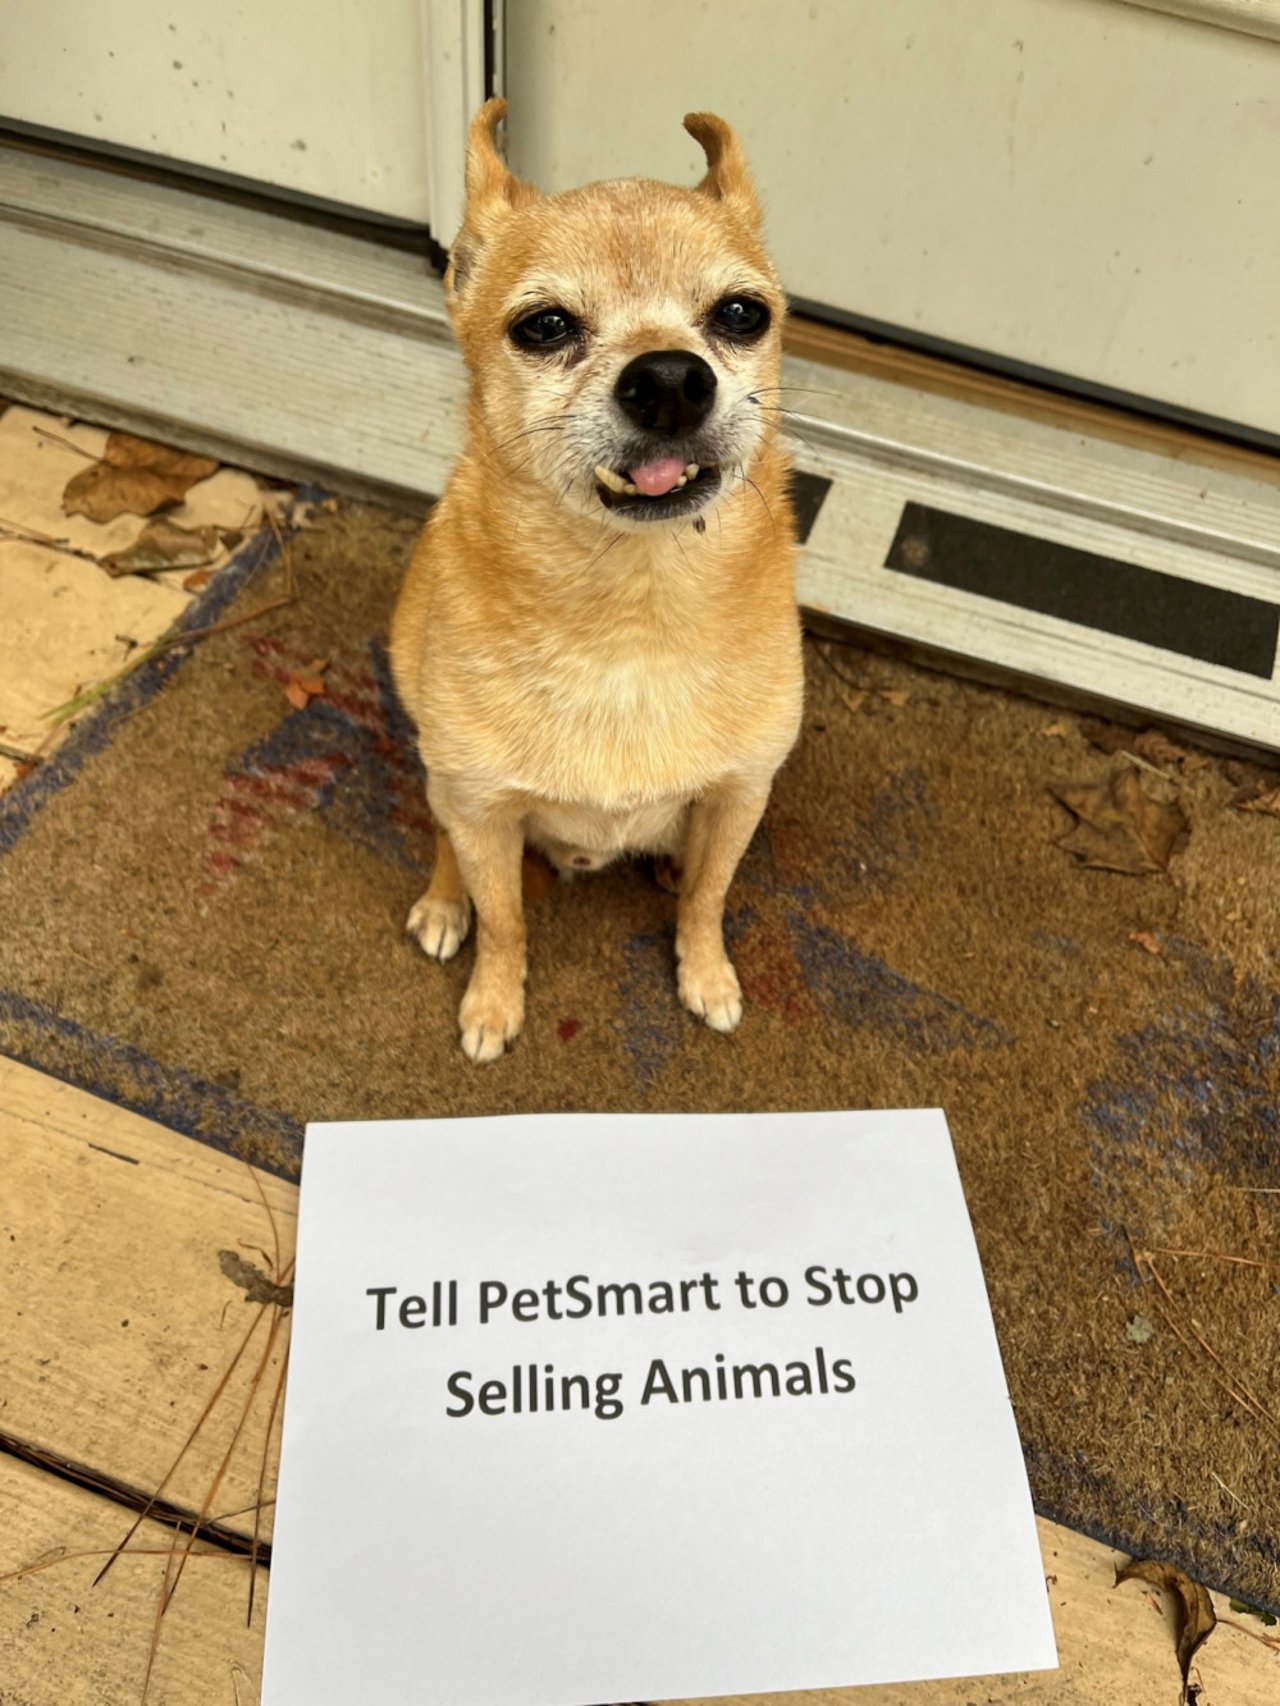 a photo of a dog with a PetSmart sign